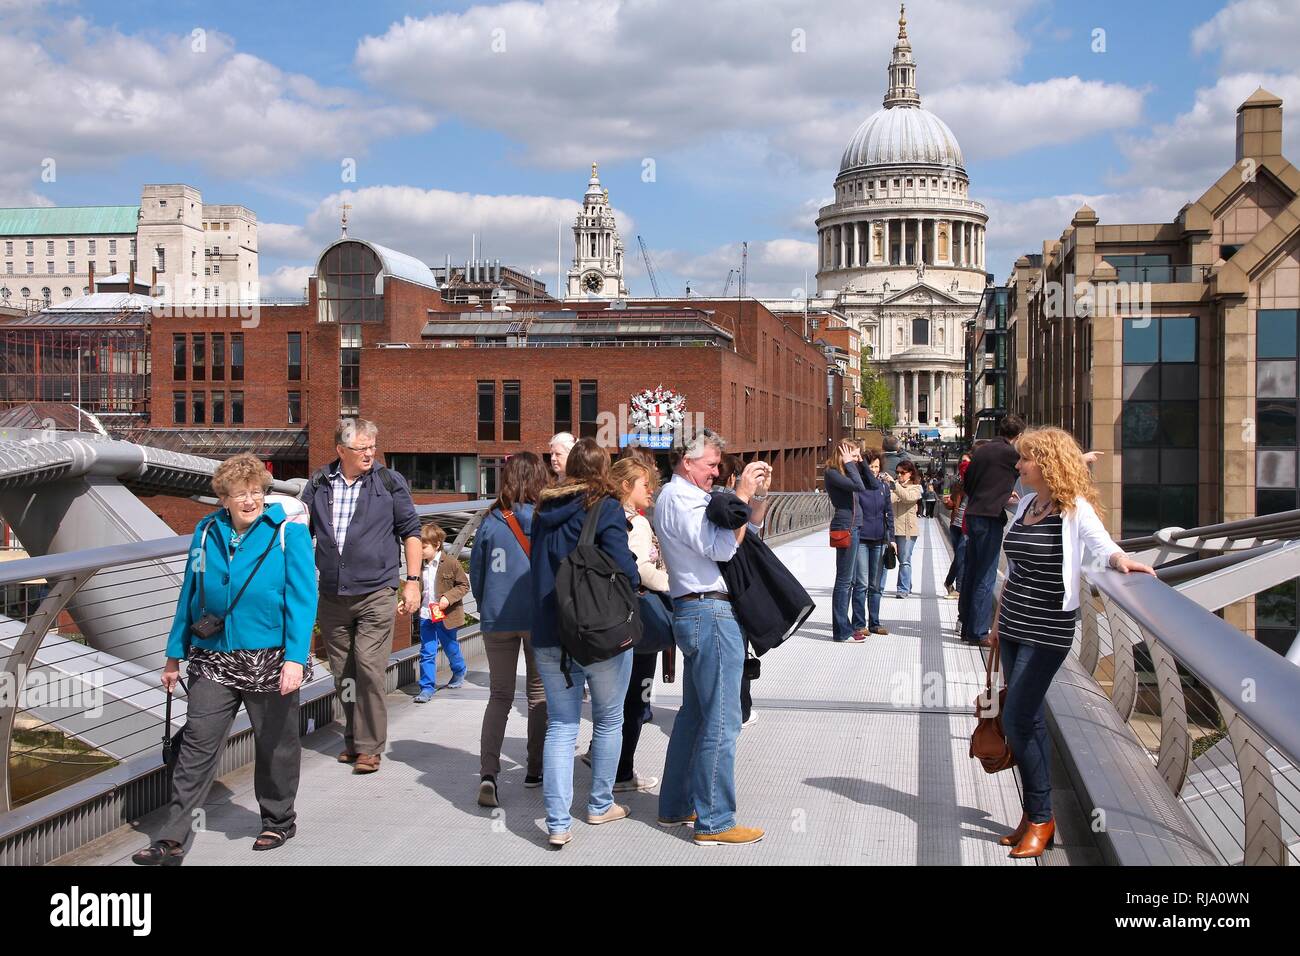 LONDON, UK - MAY 13, 2012: People walk the Millennium Bridge in London. With more than 14 million international arrivals in 2009, London is the most v Stock Photo